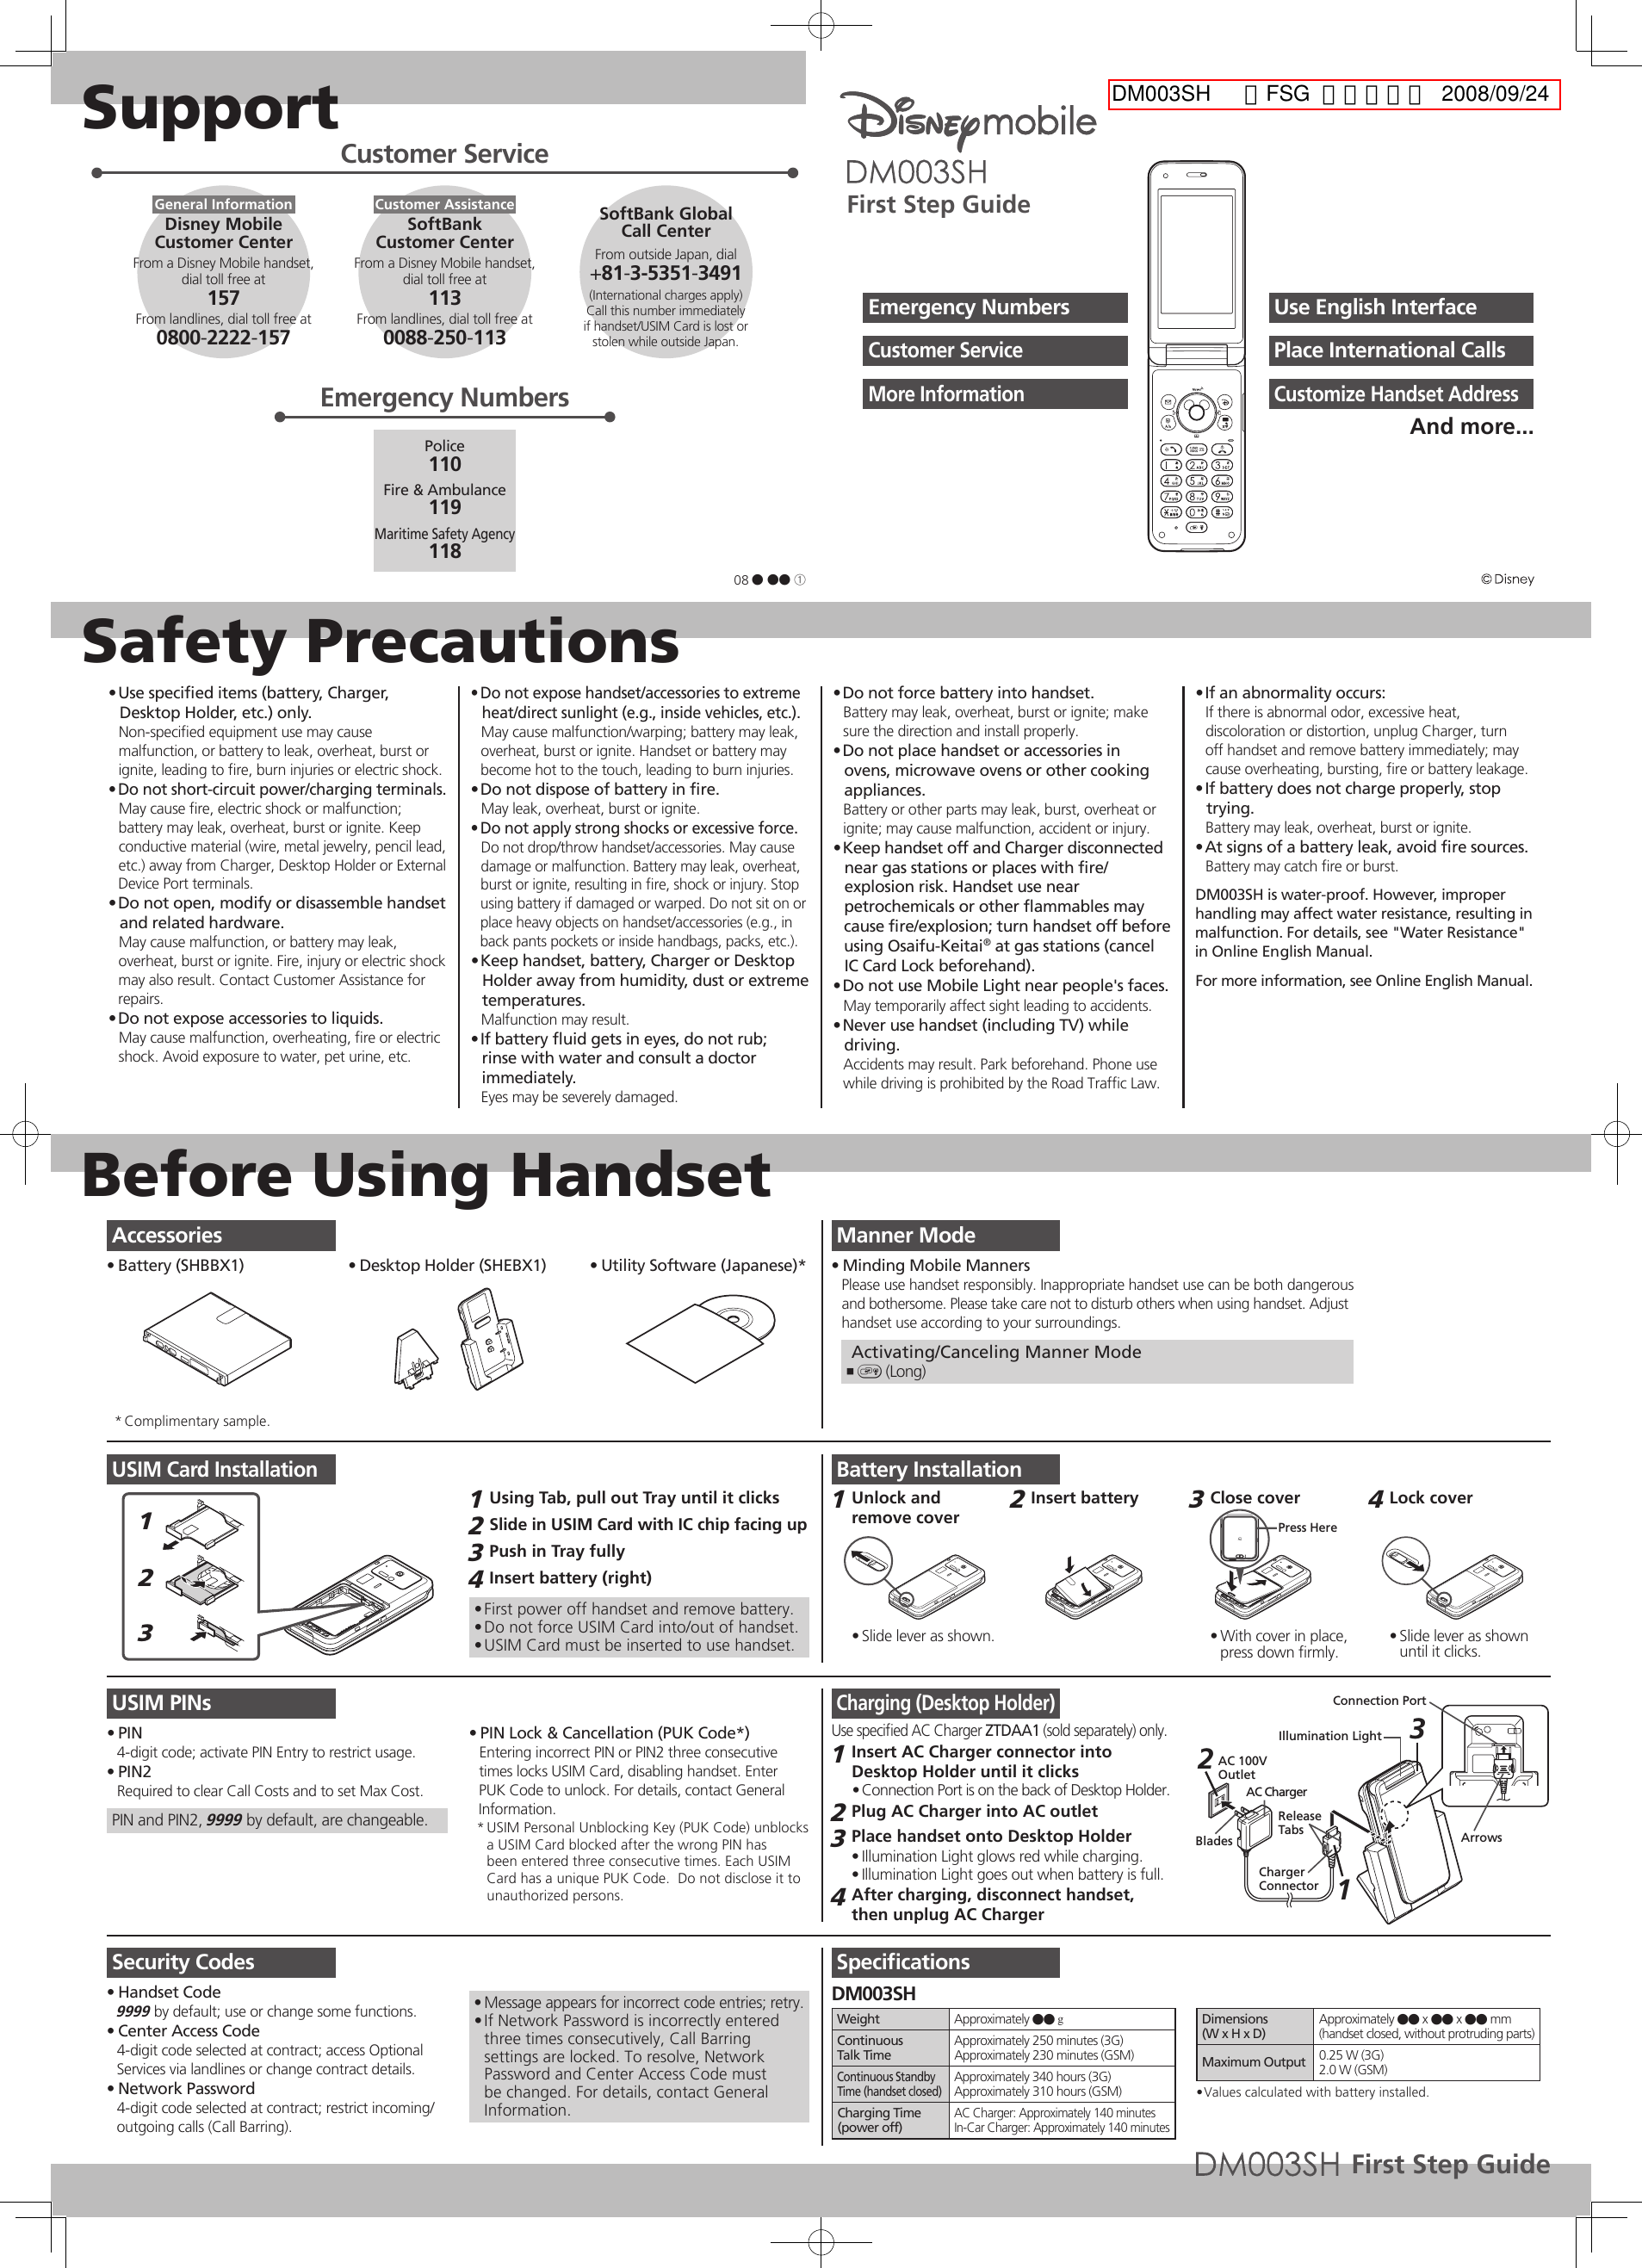 SupportSafety PrecautionsBefore Using HandsetUse speciﬁed items (battery, Charger, • Desktop Holder, etc.) only.Non-speciﬁed equipment use may cause malfunction, or battery to leak, overheat, burst or ignite, leading to ﬁre, burn injuries or electric shock.Do not short-circuit power/charging terminals.• May cause ﬁre, electric shock or malfunction; battery may leak, overheat, burst or ignite. Keep conductive material (wire, metal jewelry, pencil lead, etc.) away from Charger, Desktop Holder or External Device Port terminals.Do not open, modify or disassemble handset • and related hardware.May cause malfunction, or battery may leak, overheat, burst or ignite. Fire, injury or electric shock may also result. Contact Customer Assistance for repairs.Do not expose accessories to liquids.• May cause malfunction, overheating, ﬁre or electric shock. Avoid exposure to water, pet urine, etc.Do not expose handset/accessories to extreme • heat/direct sunlight (e.g., inside vehicles, etc.).May cause malfunction/warping; battery may leak, overheat, burst or ignite. Handset or battery may become hot to the touch, leading to burn injuries.Do not dispose of battery in ﬁre.• May leak, overheat, burst or ignite.Do not apply strong shocks or excessive force.• Do not drop/throw handset/accessories. May cause damage or malfunction. Battery may leak, overheat, burst or ignite, resulting in ﬁre, shock or injury. Stop using battery if damaged or warped. Do not sit on or place heavy objects on handset/accessories (e.g., in back pants pockets or inside handbags, packs, etc.).Keep handset, battery, Charger or Desktop • Holder away from humidity, dust or extreme temperatures.Malfunction may result.If battery ﬂuid gets in eyes, do not rub; • rinse with water and consult a doctor immediately.Eyes may be severely damaged.Do not force battery into handset.• Battery may leak, overheat, burst or ignite; make sure the direction and install properly.Do not place handset or accessories in • ovens, microwave ovens or other cooking appliances.Battery or other parts may leak, burst, overheat or ignite; may cause malfunction, accident or injury.Keep handset off and Charger disconnected • near gas stations or places with ﬁre/explosion risk. Handset use near petrochemicals or other ﬂammables may cause ﬁre/explosion; turn handset off before using Osaifu-Keitai® at gas stations (cancel IC Card Lock beforehand).Do not use Mobile Light near people&apos;s faces.• May temporarily affect sight leading to accidents.Never use handset (including TV) while • driving.Accidents may result. Park beforehand. Phone use while driving is prohibited by the Road Trafﬁc Law.If an abnormality occurs:• If there is abnormal odor, excessive heat, discoloration or distortion, unplug Charger, turn off handset and remove battery immediately; may cause overheating, bursting, ﬁre or battery leakage.If battery does not charge properly, stop • trying.Battery may leak, overheat, burst or ignite.At signs of a battery leak, avoid ﬁre sources.• Battery may catch ﬁre or burst.DM003SH is water-proof. However, improper handling may affect water resistance, resulting in malfunction. For details, see &quot;Water Resistance&quot; in Online English Manual.For more information, see Online English Manual.Manner ModeMinding Mobile Manners• Please use handset responsibly. Inappropriate handset use can be both dangerousand bothersome. Please take care not to disturb others when using handset. Adjusthandset use according to your surroundings. Activating/Canceling Manner Mode) ,  (Long)USIM Card Installation123Using Tab, pull out Tray until it clicks1 Slide in USIM Card with IC chip facing up2 Push in Tray fully3 Insert battery (right)4 First power off handset and remove battery.• Do not force USIM Card into/out of handset.• USIM Card must be inserted to use handset.• USIM PINsPIN• 4-digit code; activate PIN Entry to restrict usage.PIN2• Required to clear Call Costs and to set Max Cost.PIN and PIN2, 9999 by default, are changeable.PIN Lock &amp; Cancellation (PUK Code*)• Entering incorrect PIN or PIN2 three consecutive times locks USIM Card, disabling handset. Enter PUK Code to unlock. For details, contact General Information.USIM Personal Unblocking Key (PUK Code) unblocks * a USIM Card blocked after the wrong PIN has been entered three consecutive times. Each USIM Card has a unique PUK Code.  Do not disclose it to unauthorized persons.Security CodesHandset Code• 9999 by default; use or change some functions.Center Access Code• 4-digit code selected at contract; access Optional Services via landlines or change contract details.Network Password• 4-digit code selected at contract; restrict incoming/outgoing calls (Call Barring).Message appears for incorrect code entries; retry.• If Network Password is incorrectly entered • three times consecutively, Call Barring settings are locked. To resolve, Network Password and Center Access Code must be changed. For details, contact General Information.Battery InstallationUnlock and 1 remove coverSlide lever as shown.• Insert battery 2 Close cover 3 Press HereWith cover in place, • press down ﬁrmly.Lock cover 4 Slide lever as shown • until it clicks.Charging (Desktop Holder)Use speciﬁed AC Charger ZTDAA1 (sold separately) only.Insert AC Charger connector into 1 Desktop Holder until it clicksConnection Port is on the back of Desktop Holder.• Plug AC Charger into AC outlet2 Place handset onto Desktop Holder3 Illumination Light glows red while charging.• Illumination Light goes out when battery is full.• After charging, disconnect handset, 4 then unplug AC ChargerAC 100VOutletBladesAC ChargerReleaseTabsCharger ConnectorArrowsConnection Port21Illumination Light 3SpeciﬁcationsDM003SHWeight Approximately ●● gContinuousTalk TimeApproximately 250 minutes (3G)Approximately 230 minutes (GSM)Continuous Standby Time (handset closed)Approximately 340 hours (3G)Approximately 310 hours (GSM)Charging Time(power off)AC Charger: Approximately 140 minutesIn-Car Charger: Approximately 140 minutesDimensions(W x H x D)Approximately ●● x ●● x ●● mm(handset closed, without protruding parts)Maximum Output 0.25 W (3G)2.0 W (GSM)Values calculated with battery installed.• Use English InterfaceEmergency NumbersPlace International CallsCustomer ServiceCustomize Handset AddressMore InformationAnd more...AccessoriesBattery (SHBBX1)•  Desktop Holder (SHEBX1)•  Utility Software (Japanese)*• Complimentary sample.* Customer ServiceGeneral InformationFrom a Disney Mobile handset,dial toll free at157From landlines, dial toll free at0800-2222-157Disney MobileCustomer CenterCustomer AssistanceFrom a Disney Mobile handset,dial toll free at113From landlines, dial toll free at0088-250-113SoftBank Customer Center From outside Japan, dial+81-3-5351-3491(International charges apply)Call this number immediatelyif handset/USIM Card is lost or stolen while outside Japan.SoftBank GlobalCall CenterEmergency NumbersPolice110Fire &amp; Ambulance119Maritime Safety Agency11808 ● ●● ①First Step GuideFirst Step GuideDM003SH  英語FSG  印刷承認校  2008/09/24